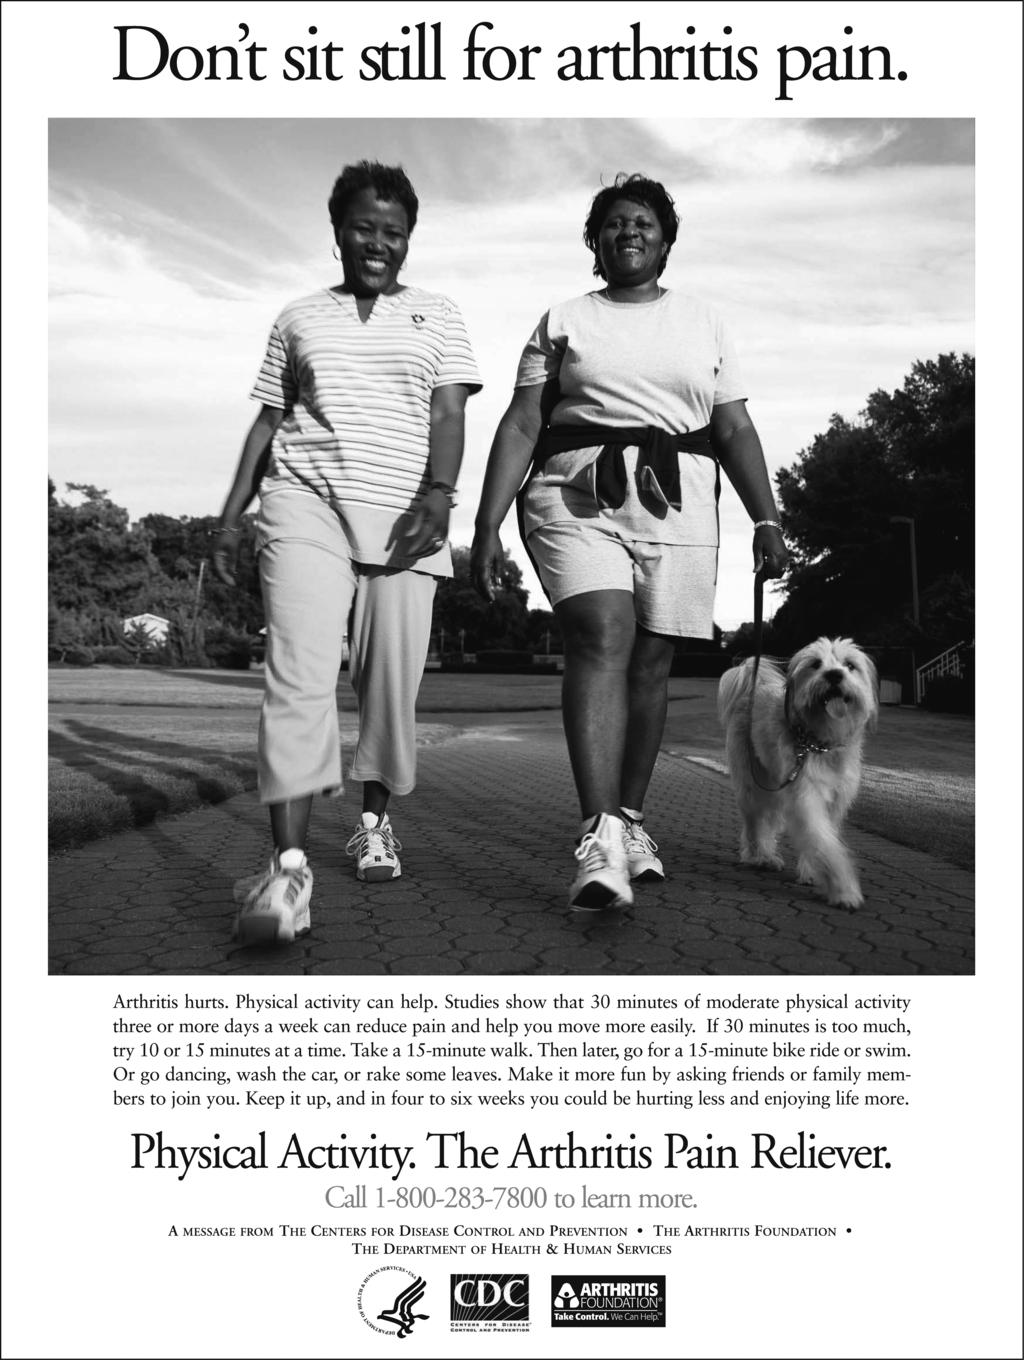 FIGURE 1. Print advertisement from a health communications campaign. An example of a collaboration between the AF, the CDC, and the Department of Health and Human Services.